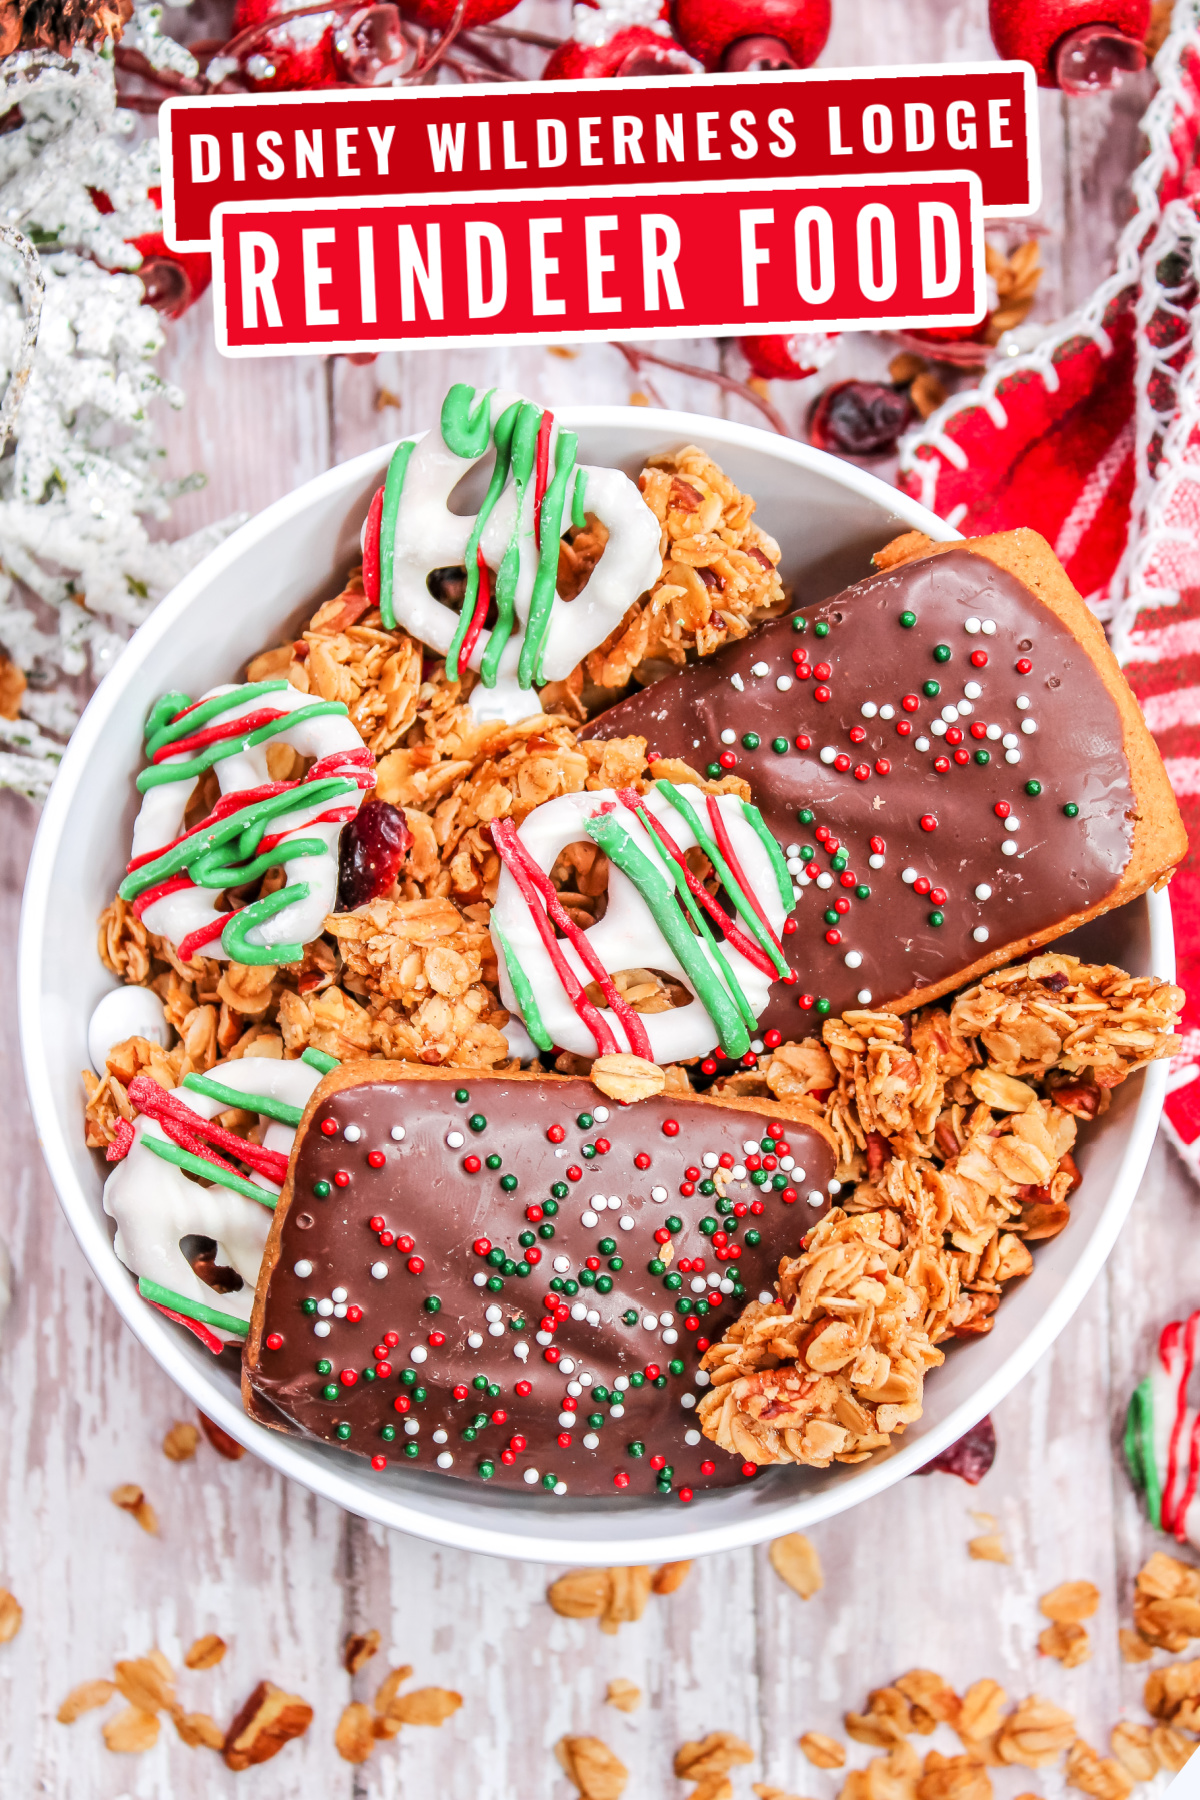 This popular Christmas recipe is inspired by Disney’s Wilderness Lodge Reindeer Food, available only during the holiday season.